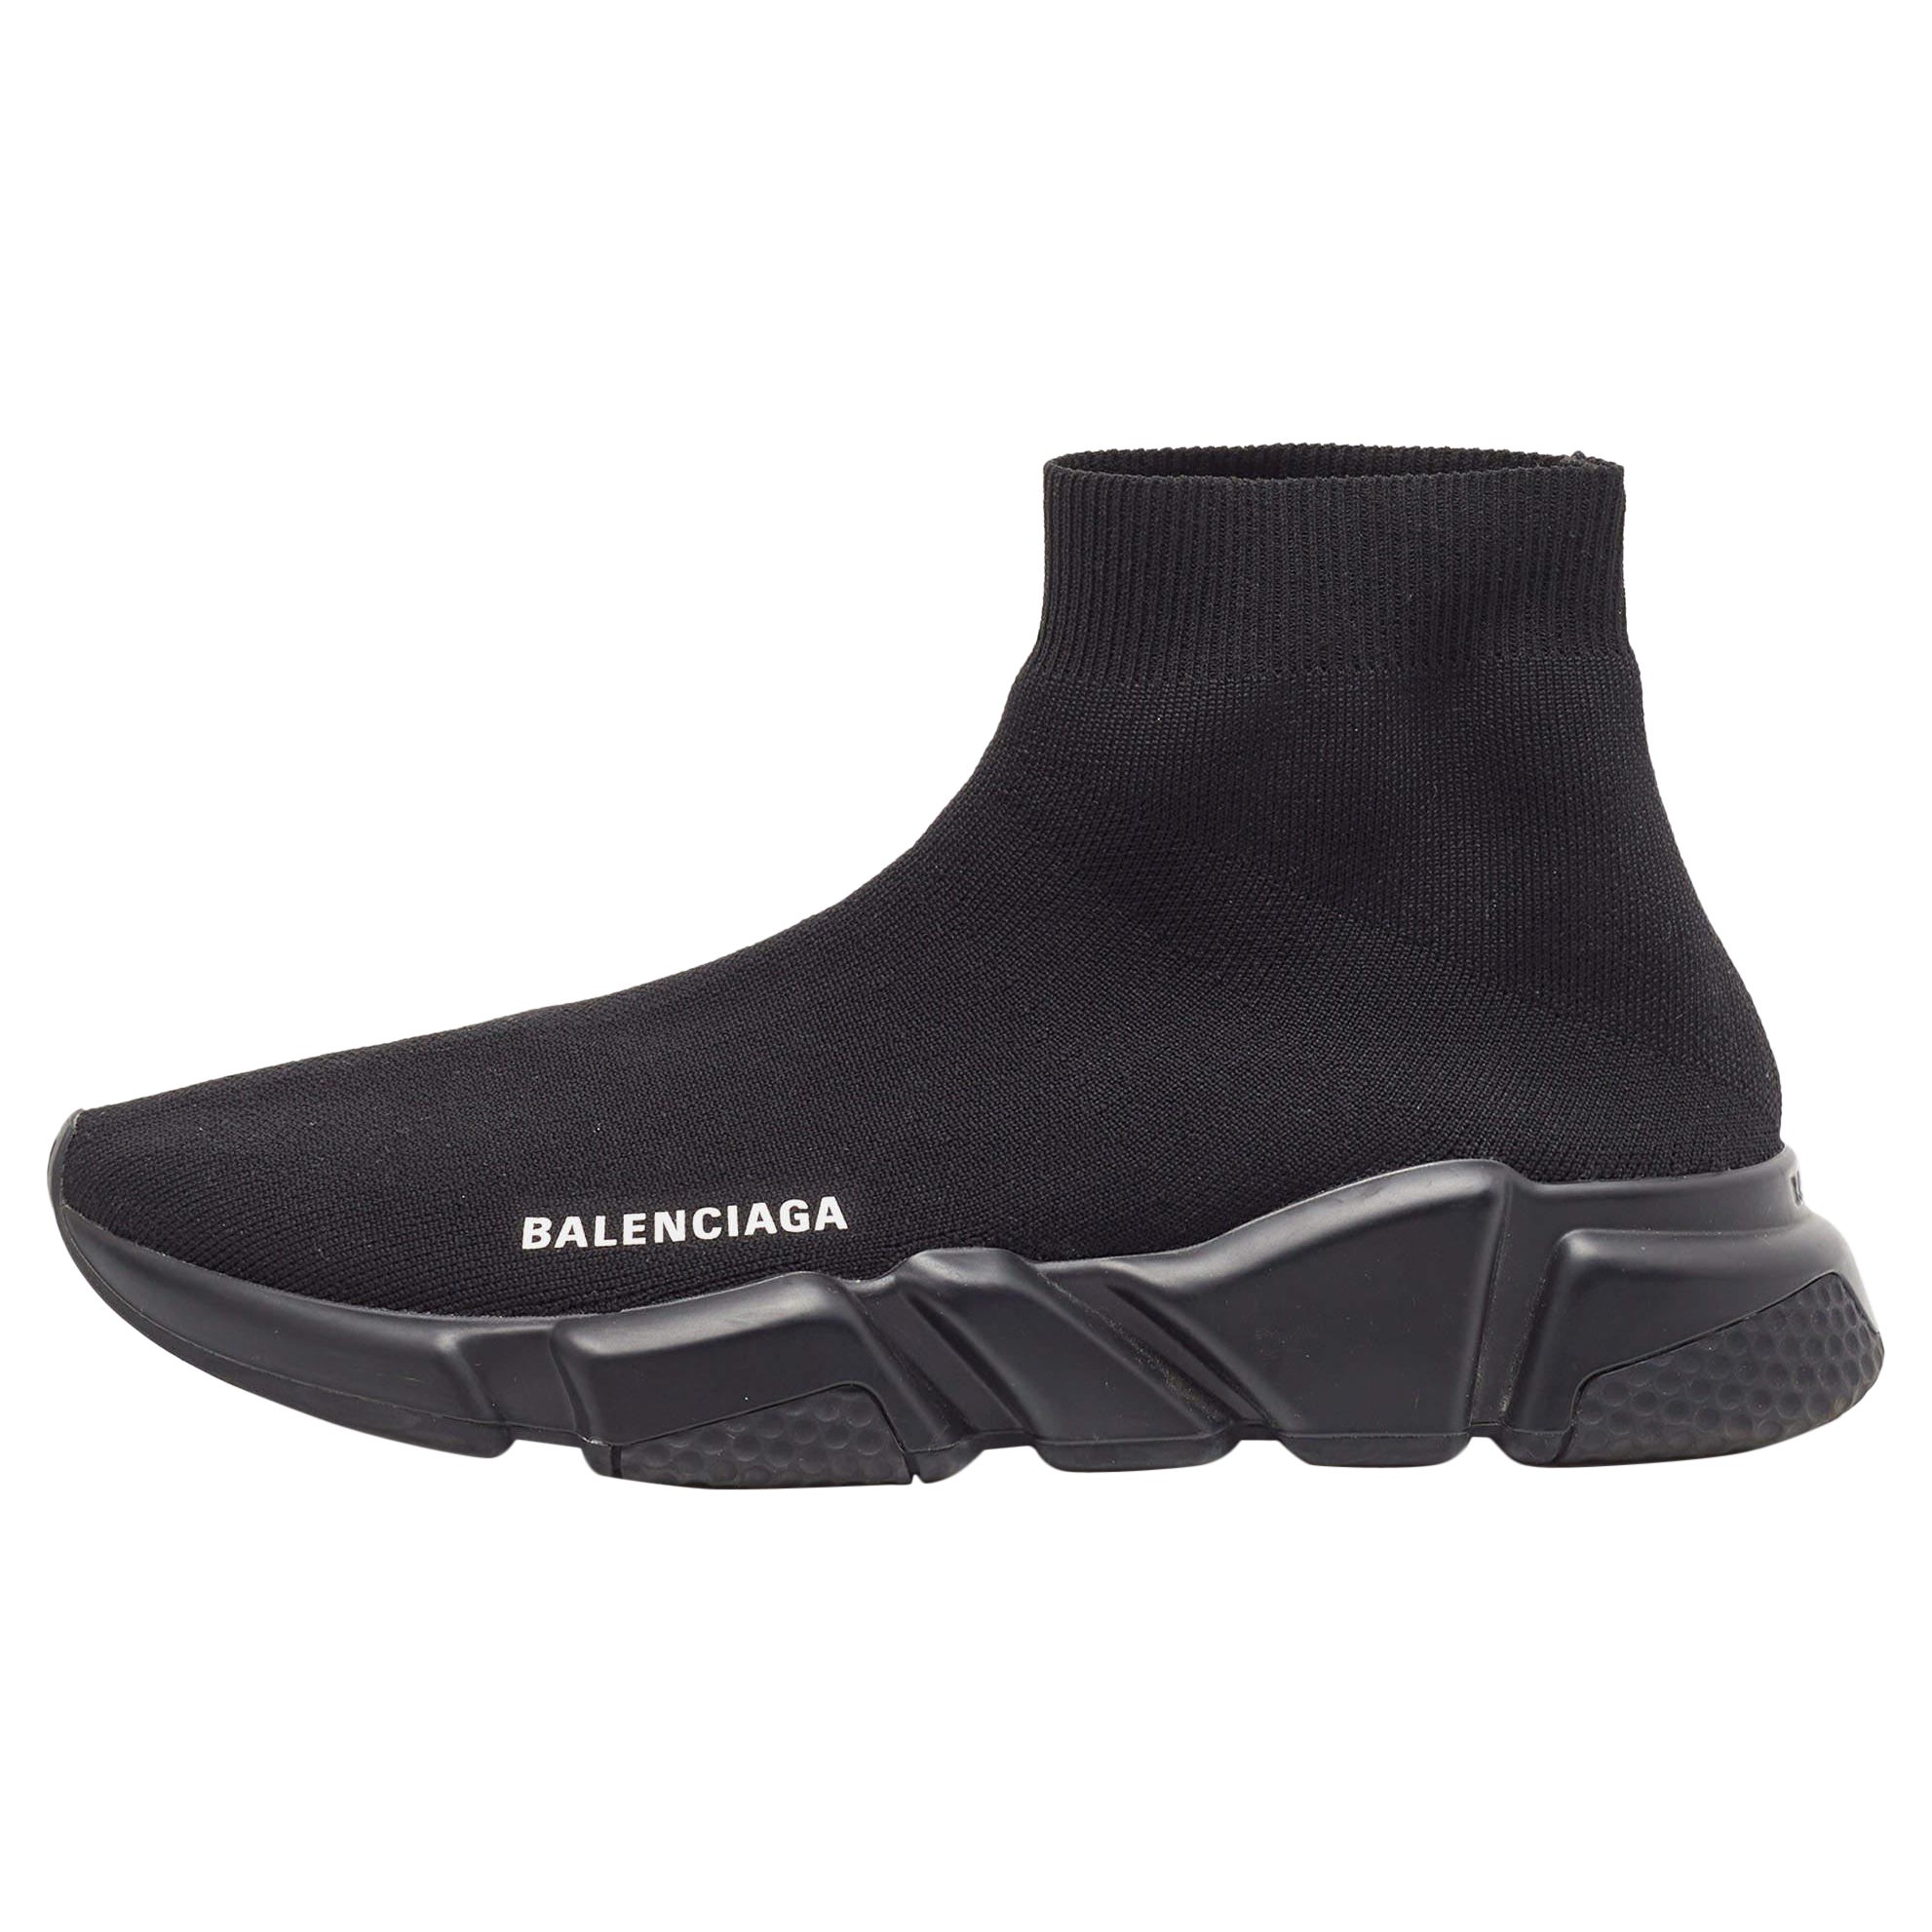 Balenciaga Black Knit Fabric Speed Trainer Sneakers Size 41 For Sale